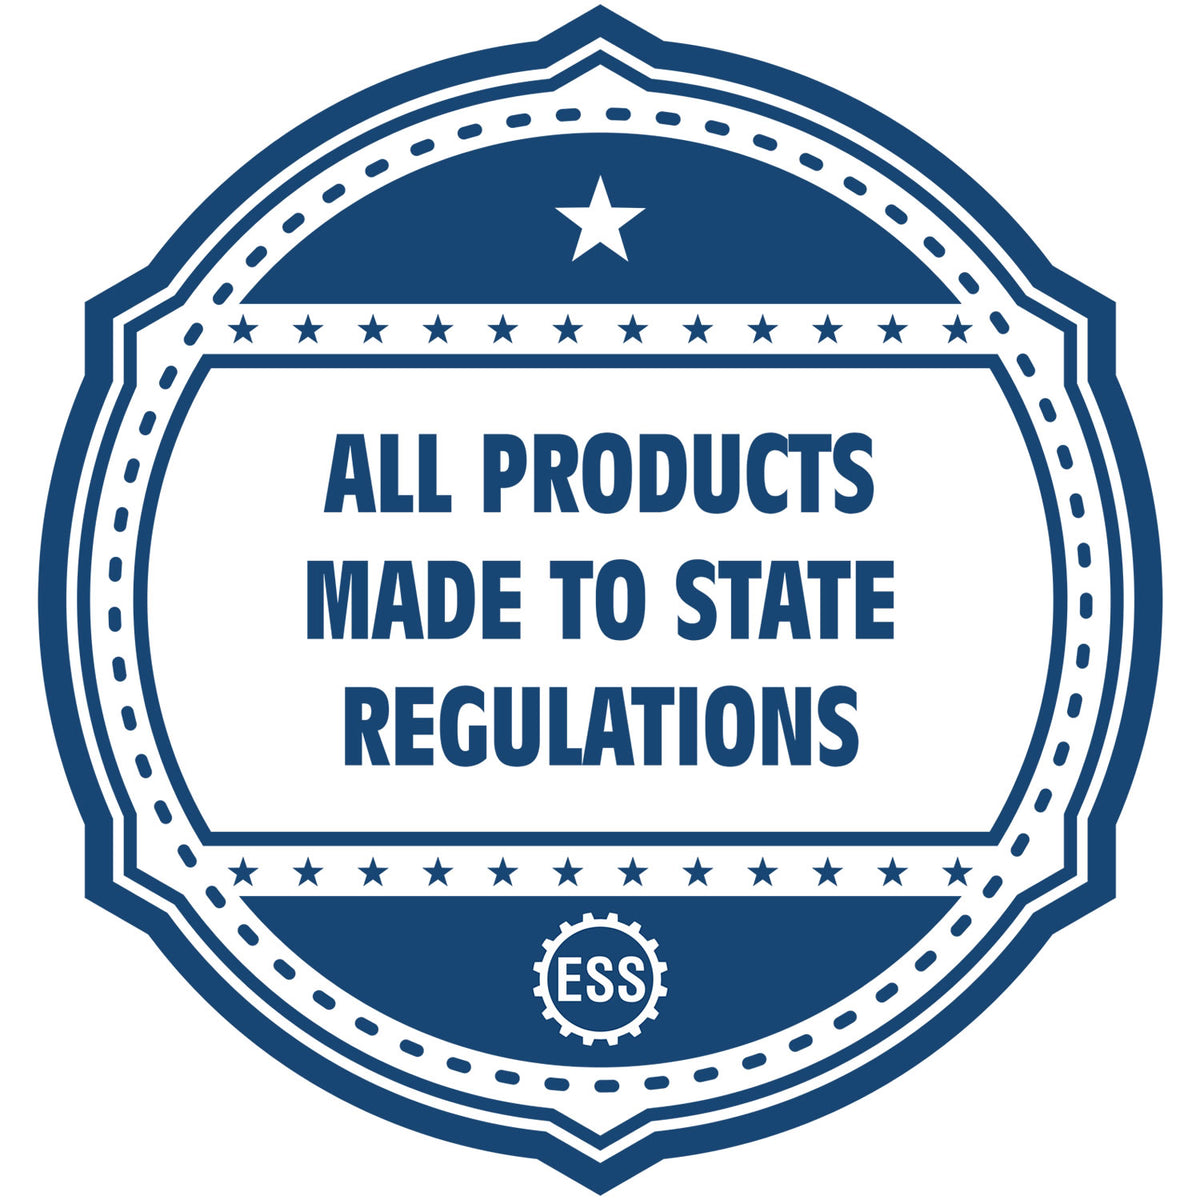 An icon or badge element for the Self-Inking Pennsylvania Landscape Architect Stamp showing that this product is made in compliance with state regulations.